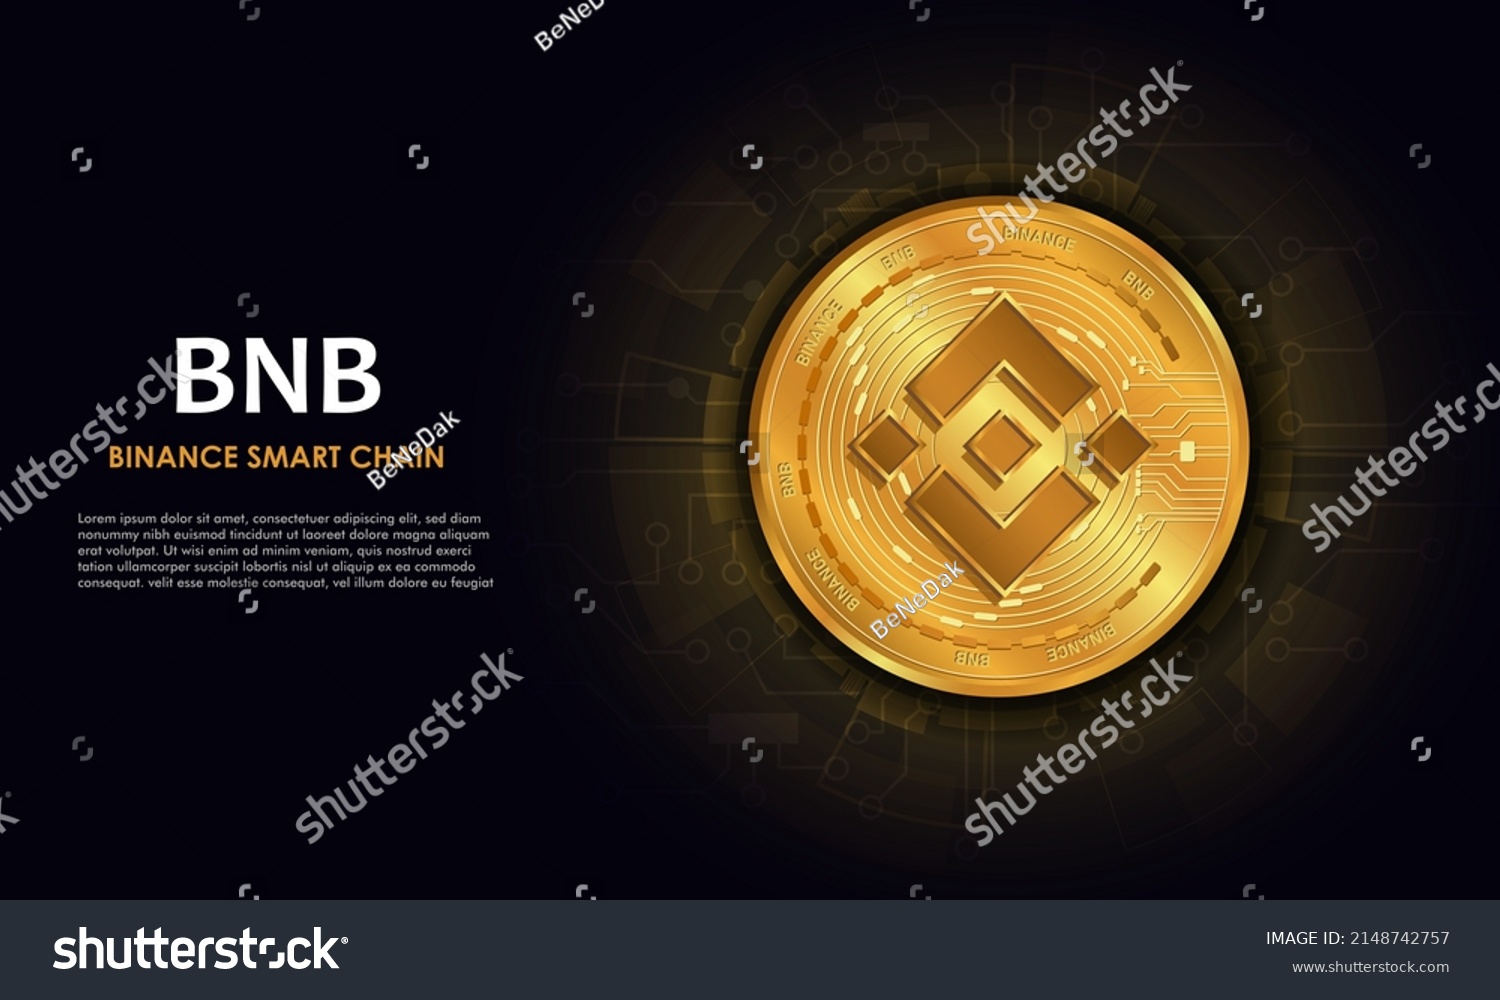 SVG of Binance samart chain BNB.Technology background with circuit.BNBlogo.Crypto currency concept. svg